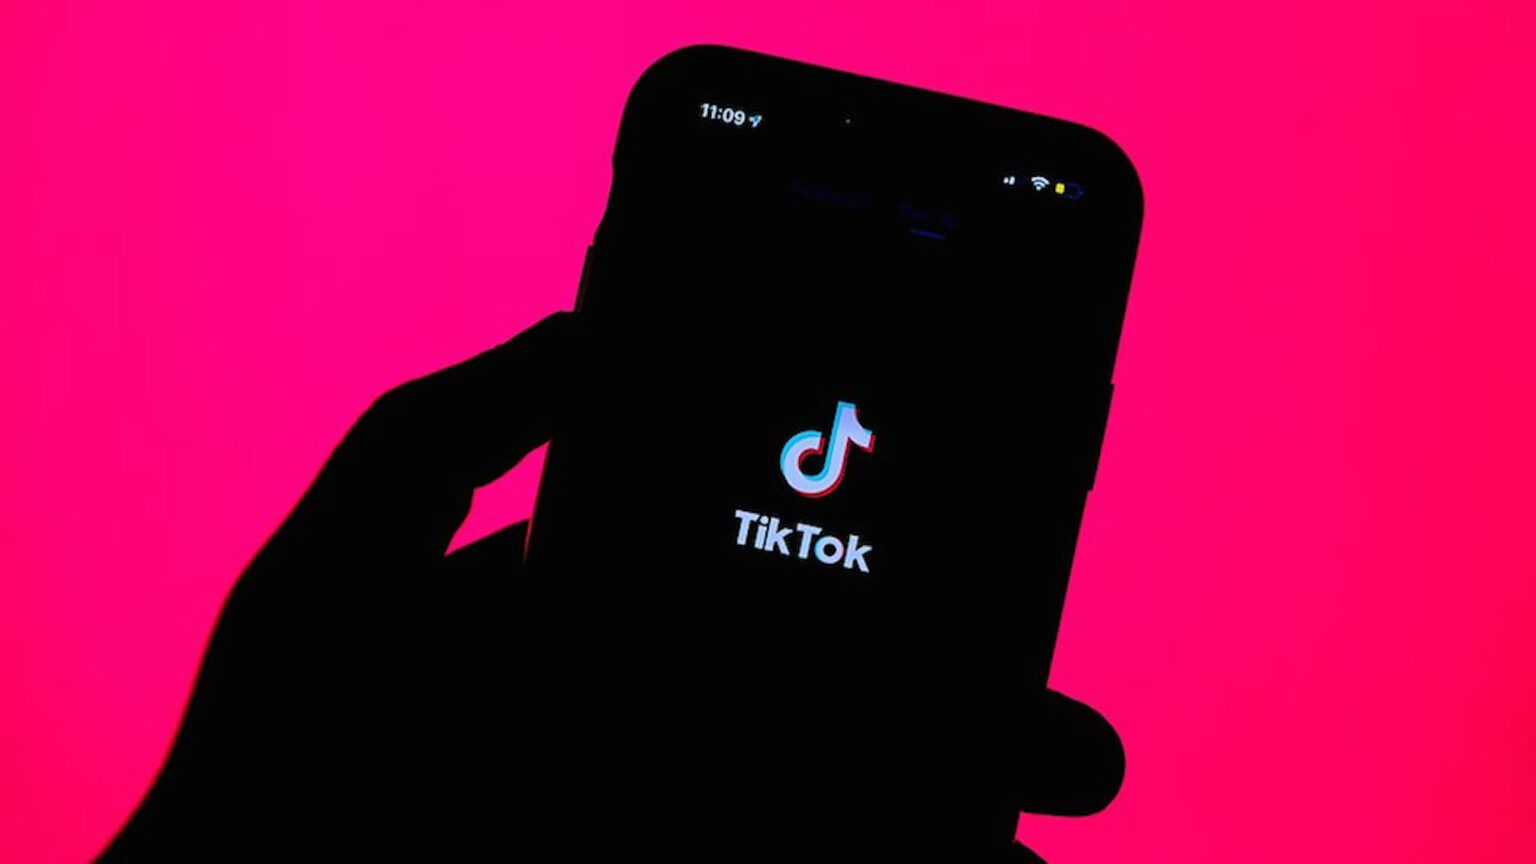 Songs have the chance to trend once they go viral on TikTok. Here are the jams you should be listening to next on your TikTok song list.